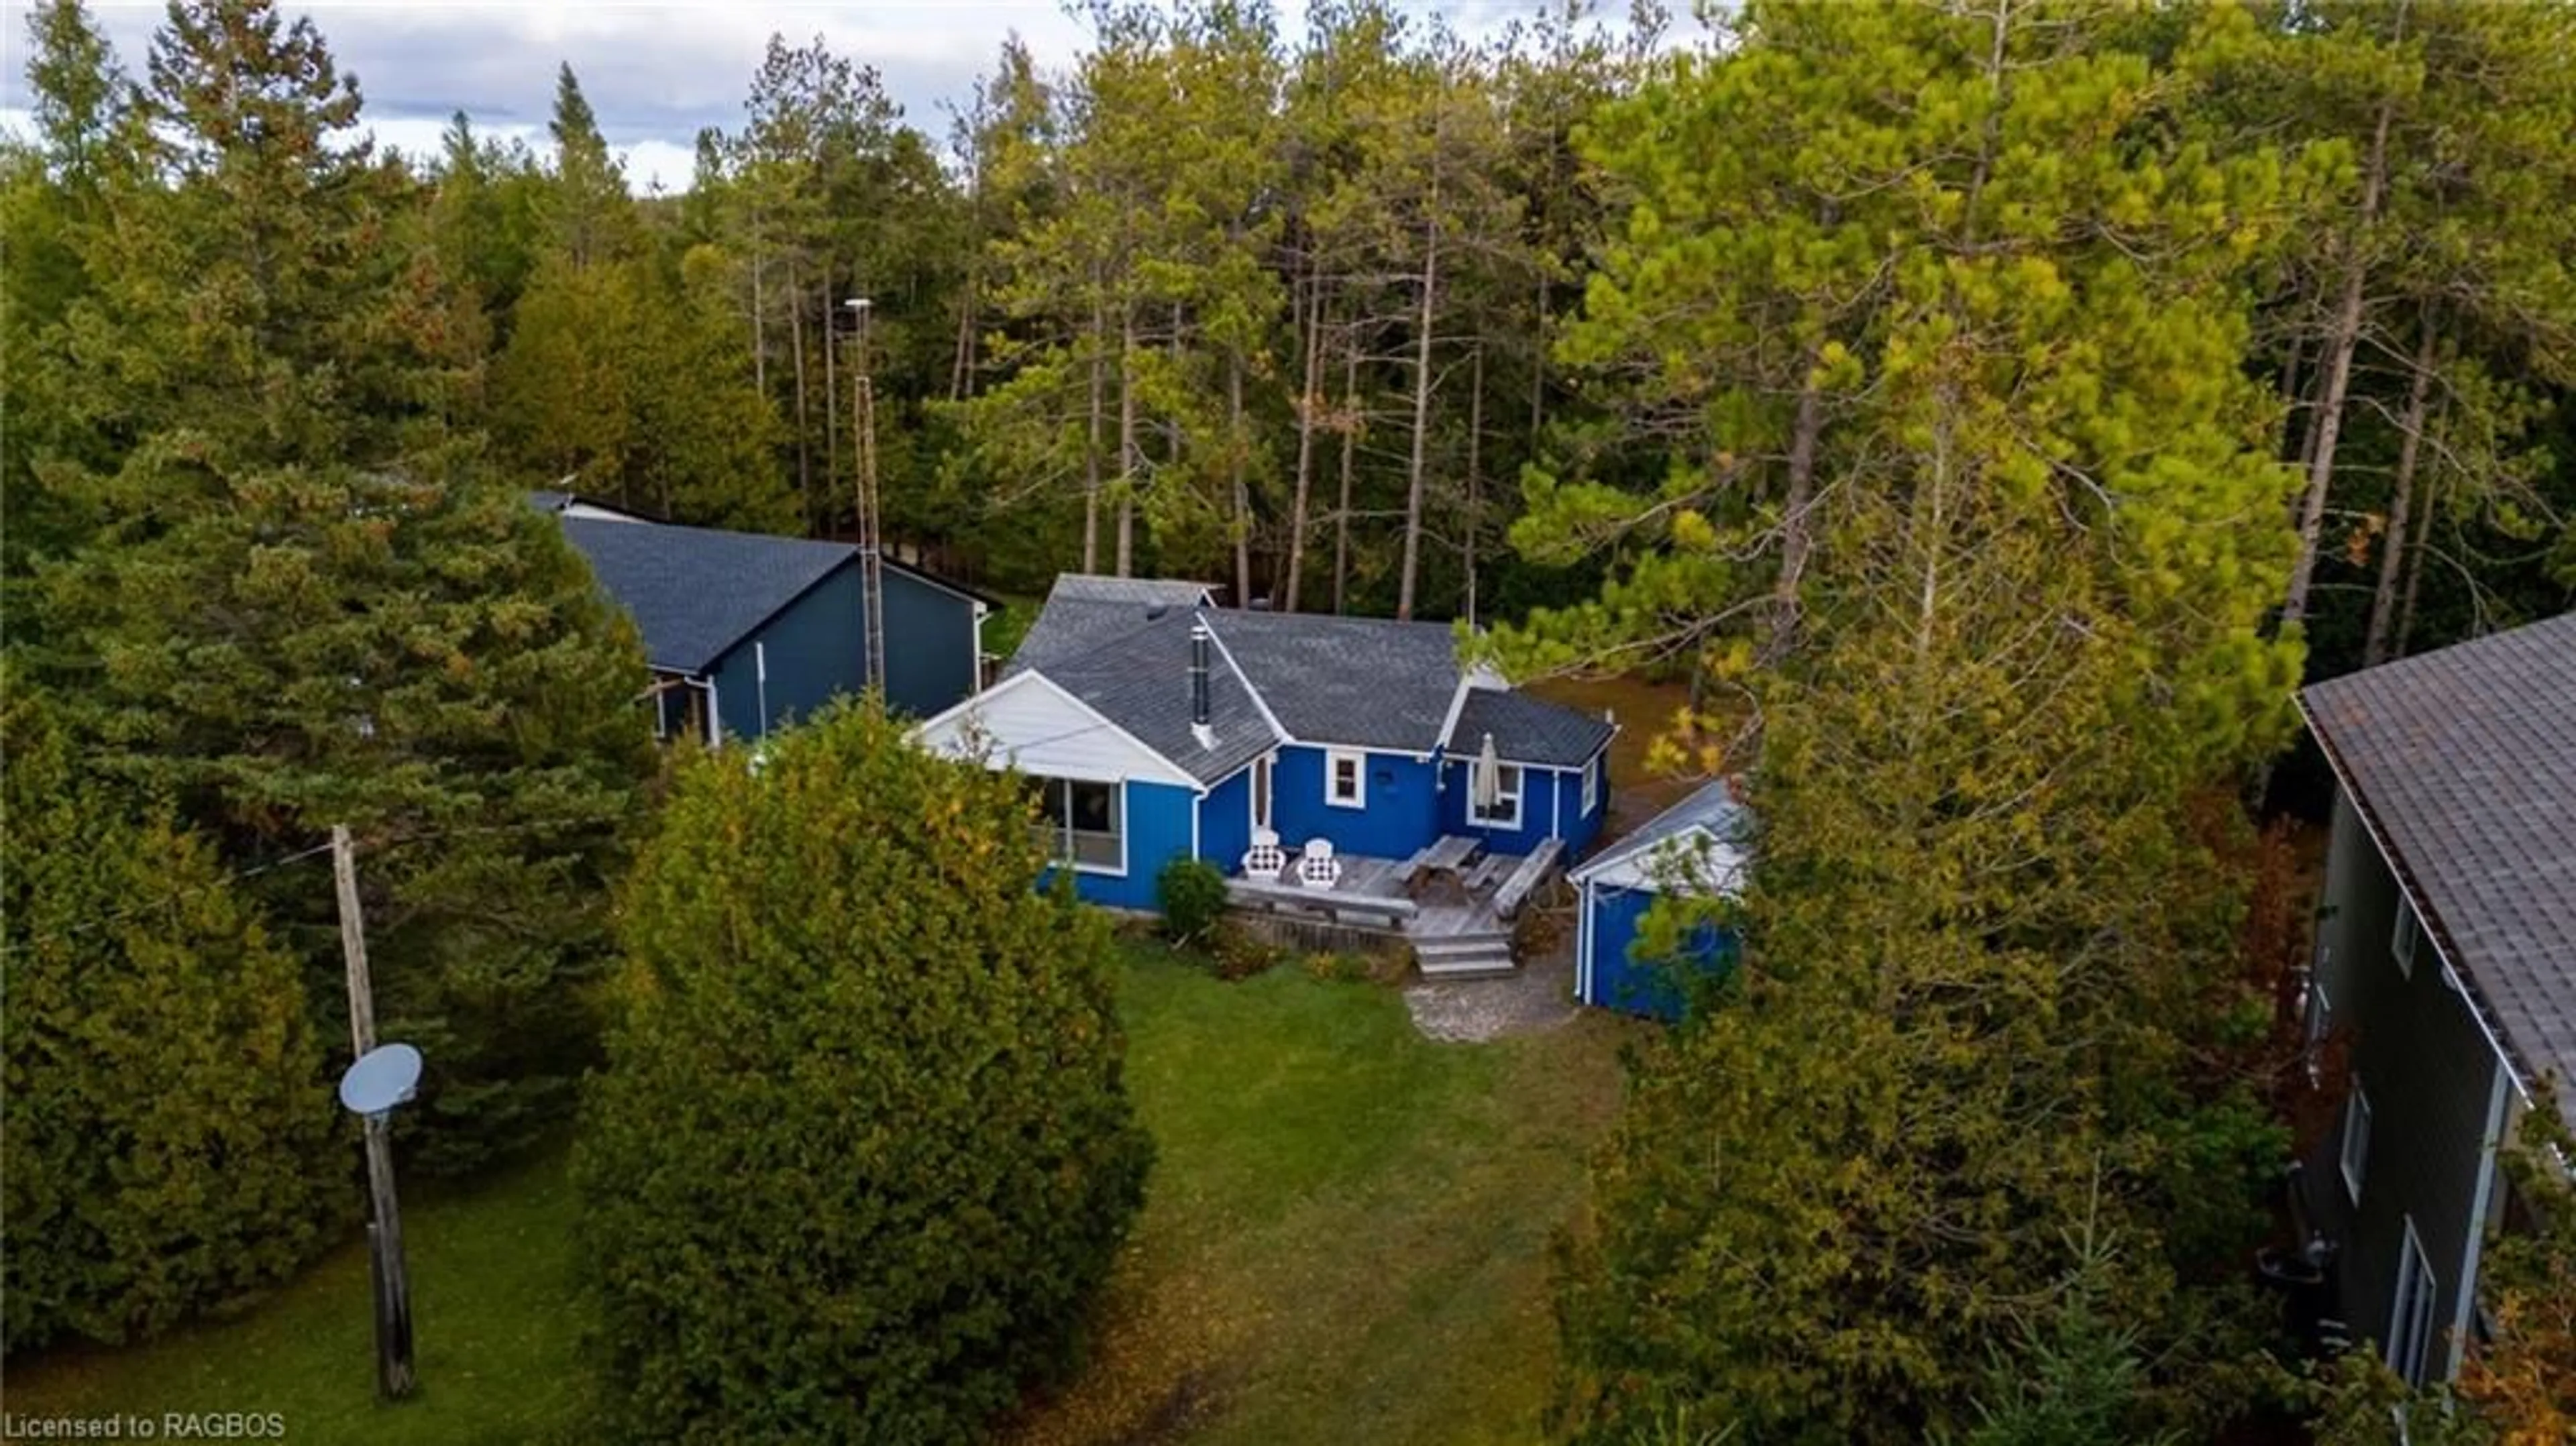 Cottage for 559 Bay St, Oliphant Ontario N0H 2T0